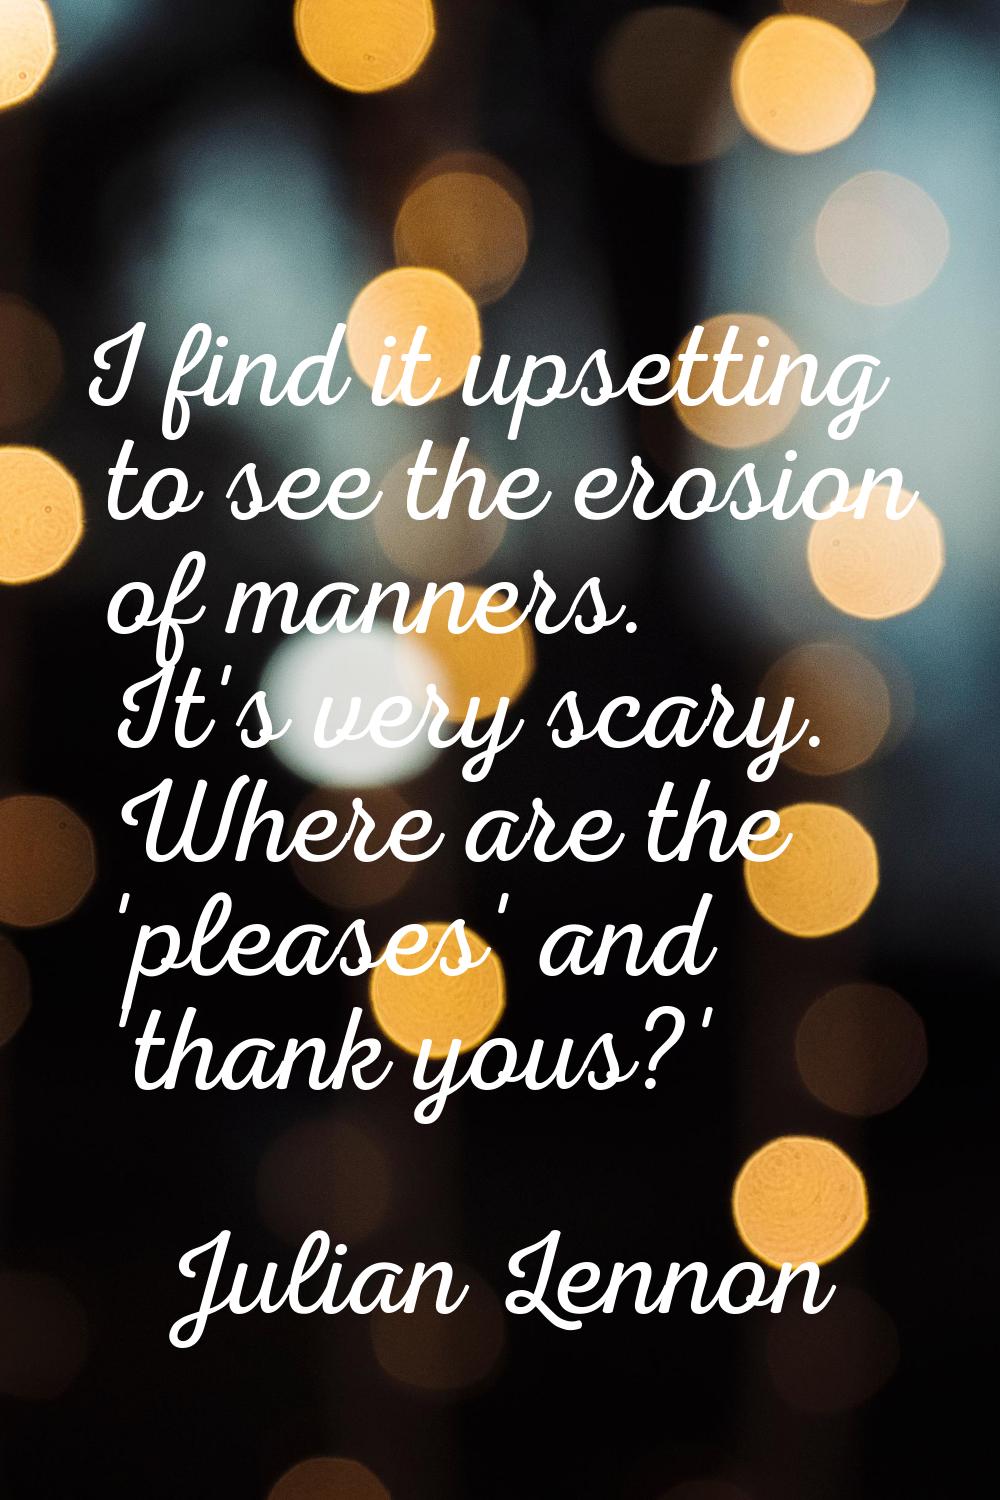 I find it upsetting to see the erosion of manners. It's very scary. Where are the 'pleases' and 'th